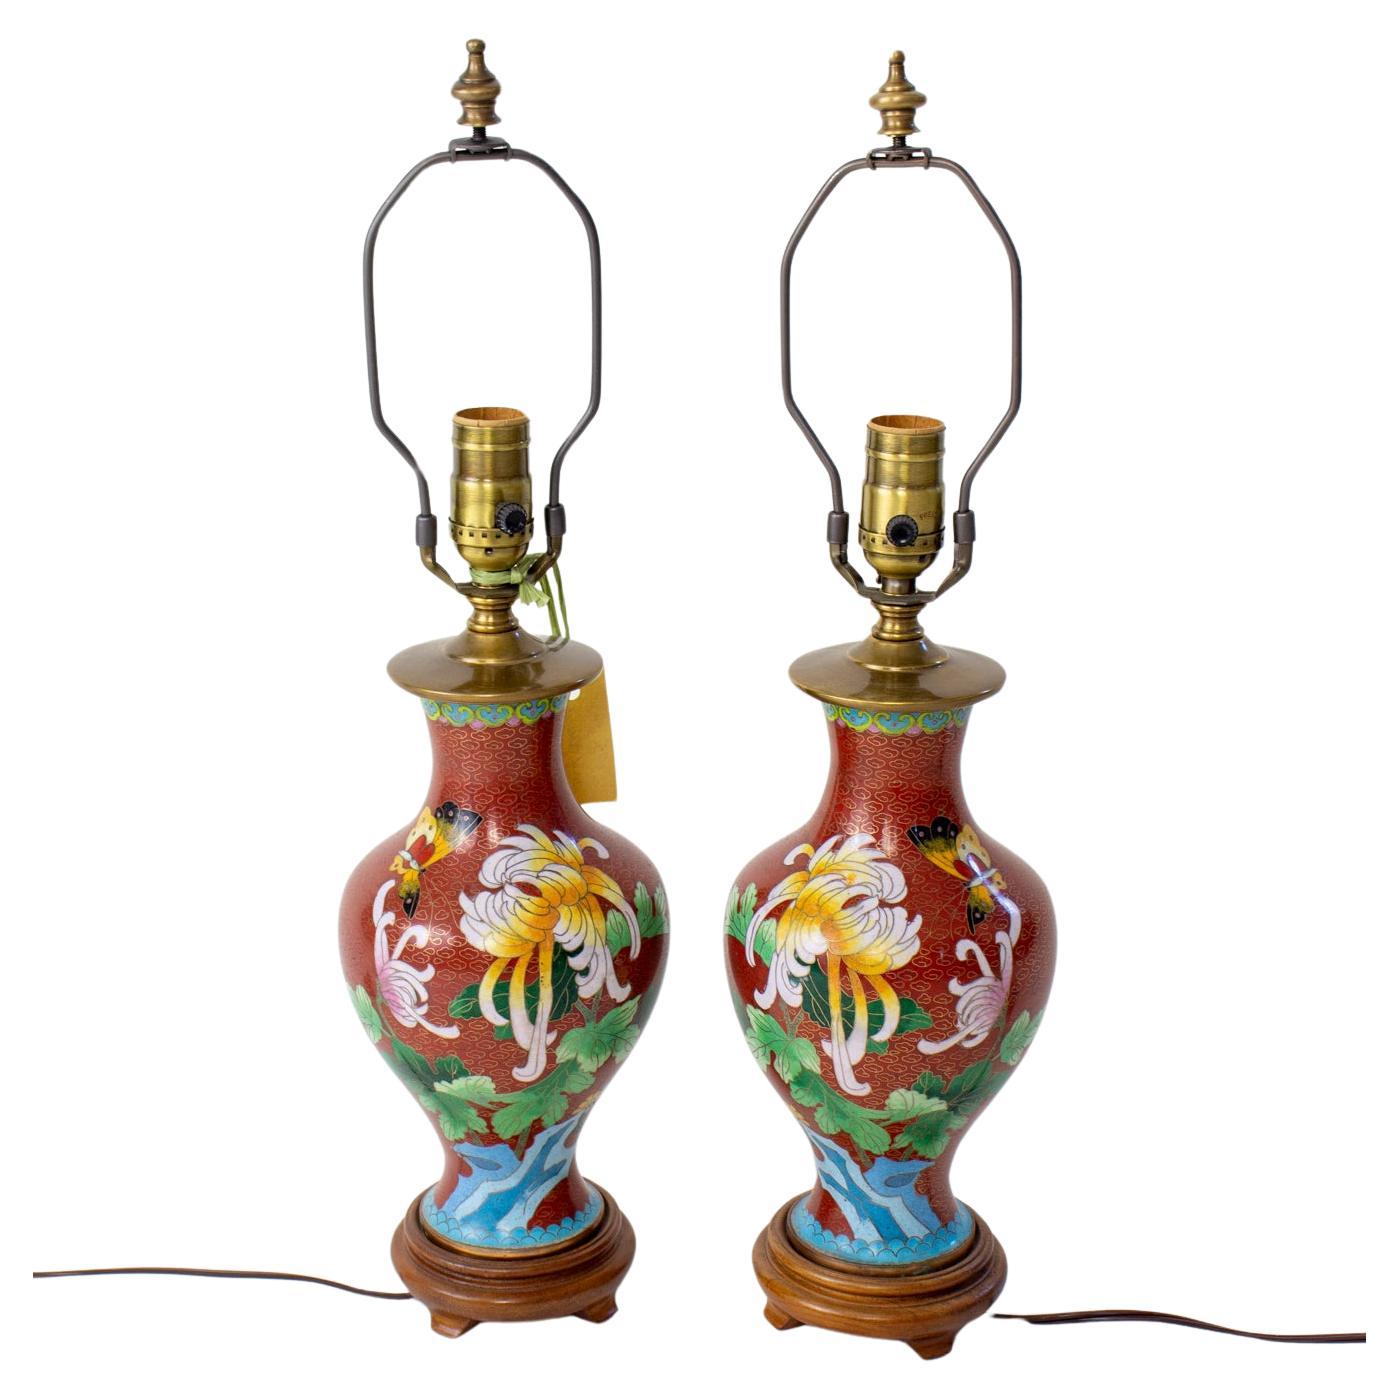 Mid 20th Century Chrysanthemum Cloisonne Table Lamps - a Pair For Sale